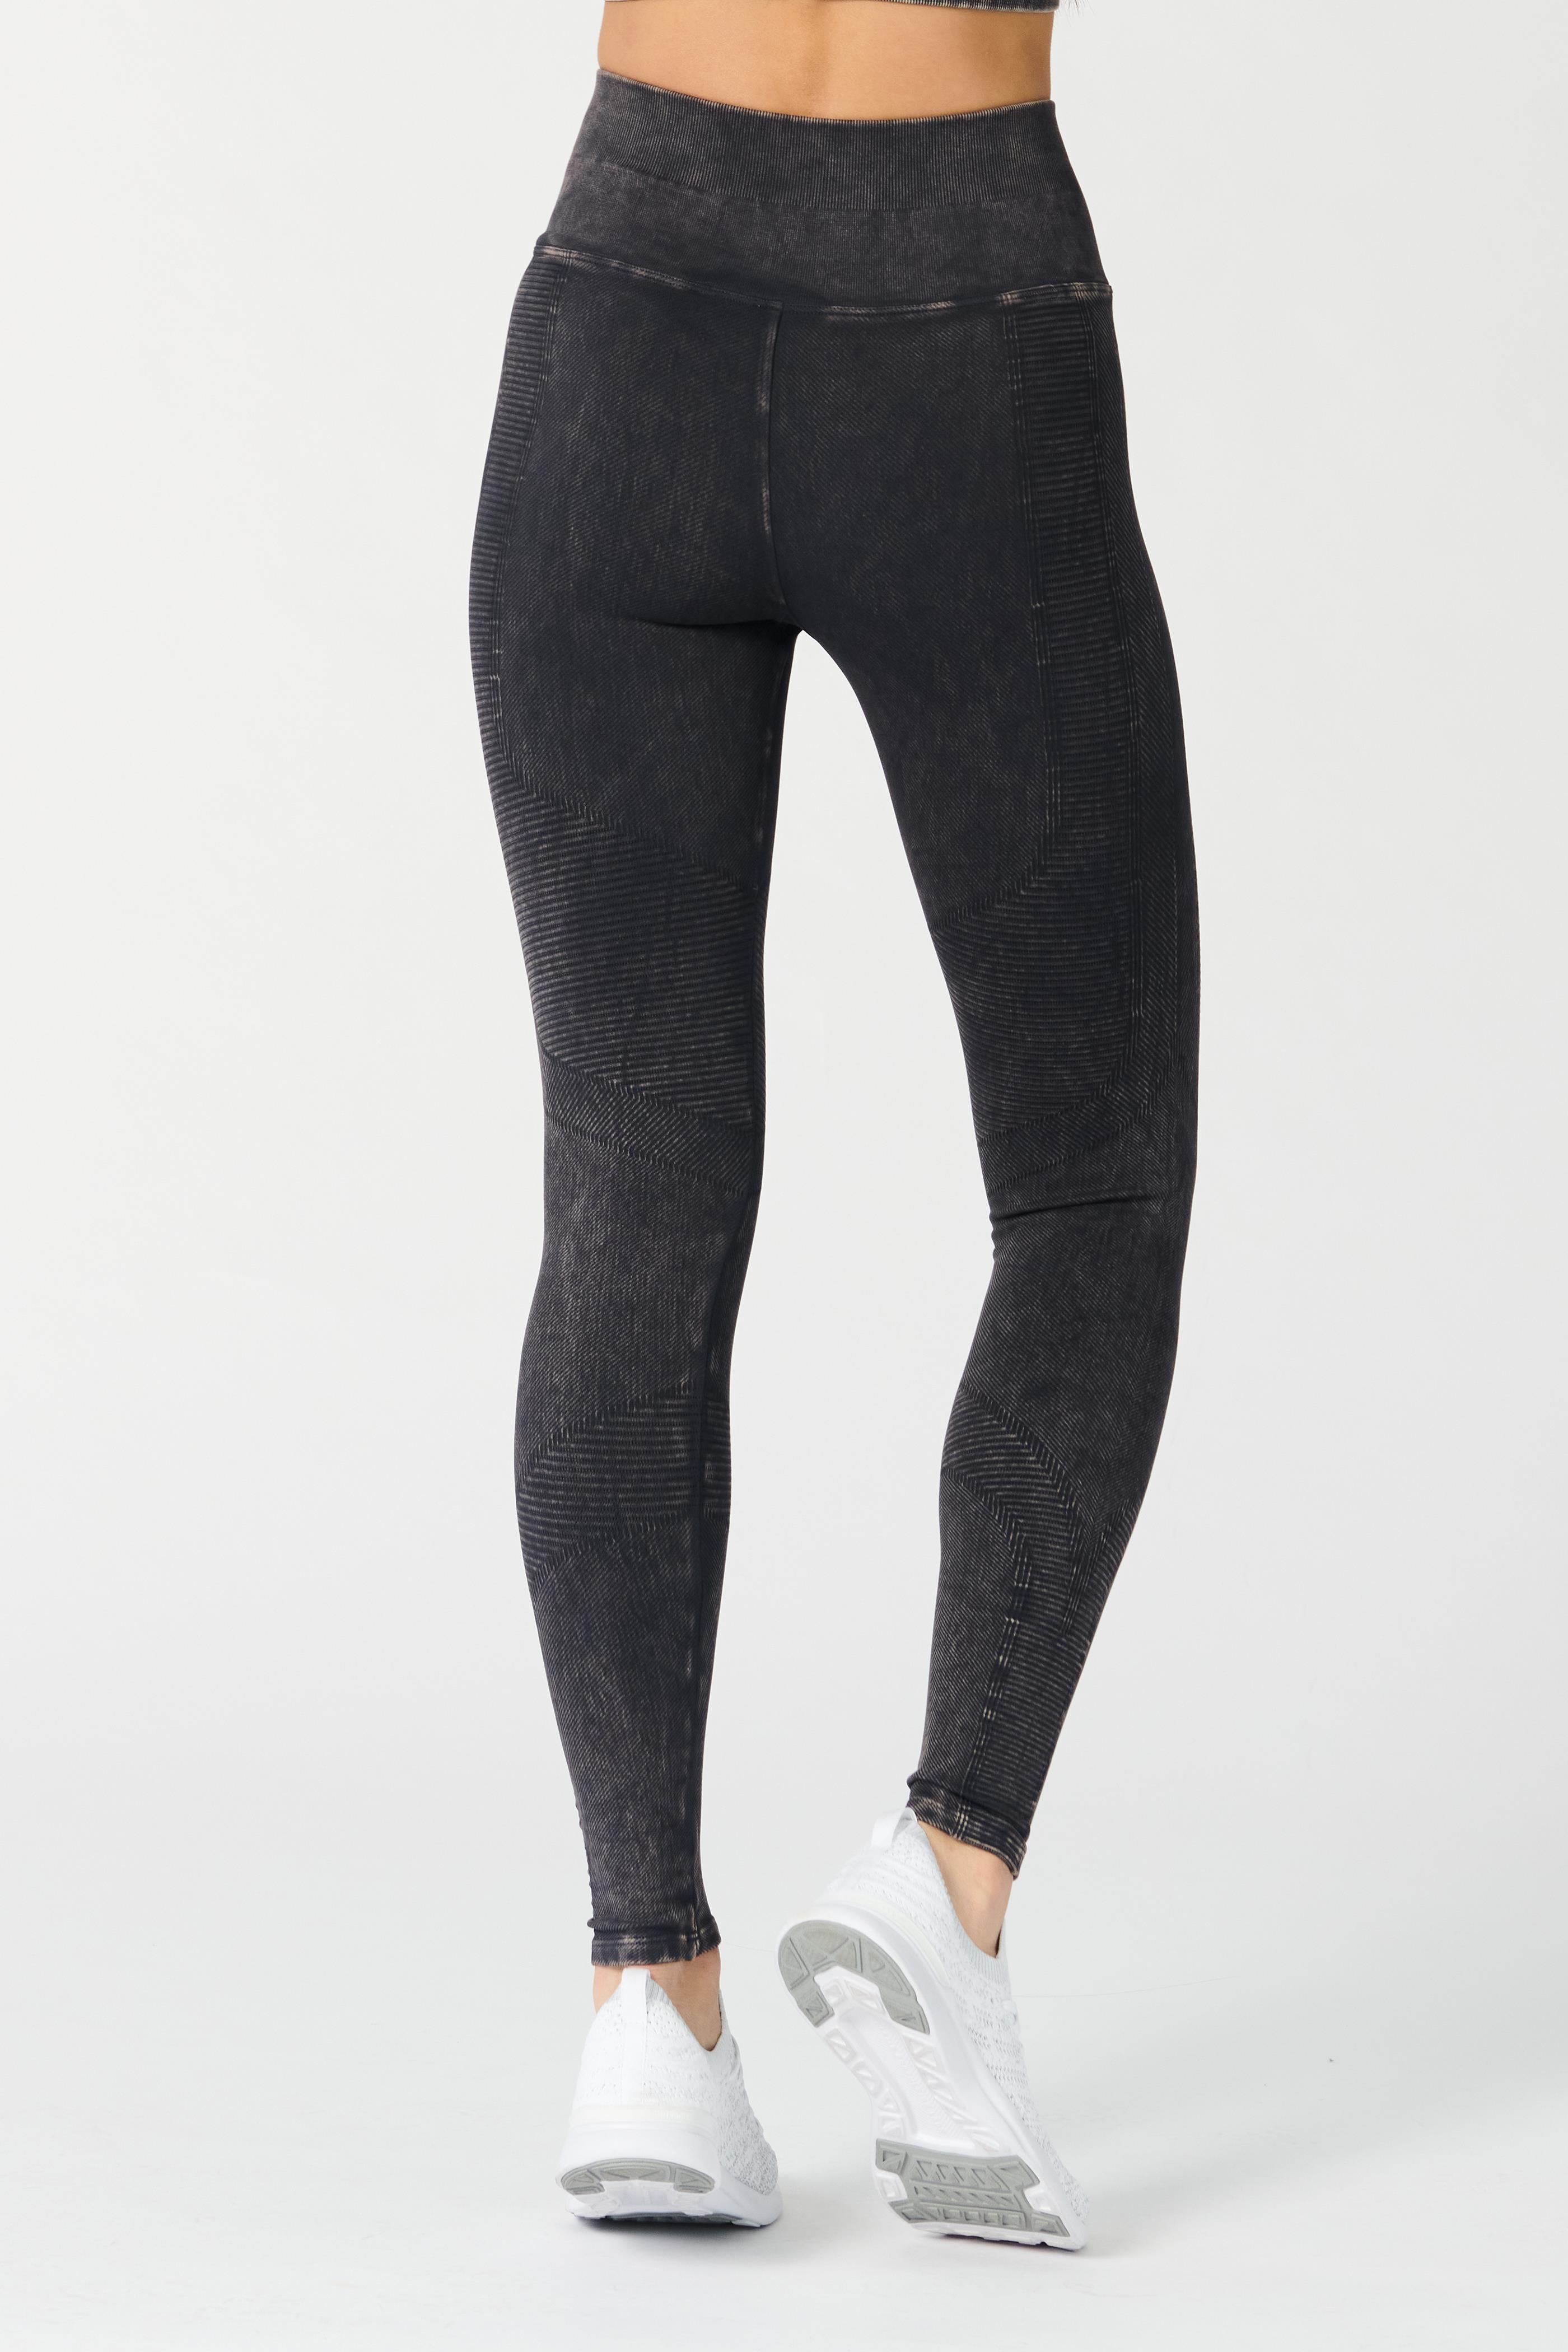 one-by-one-legging3